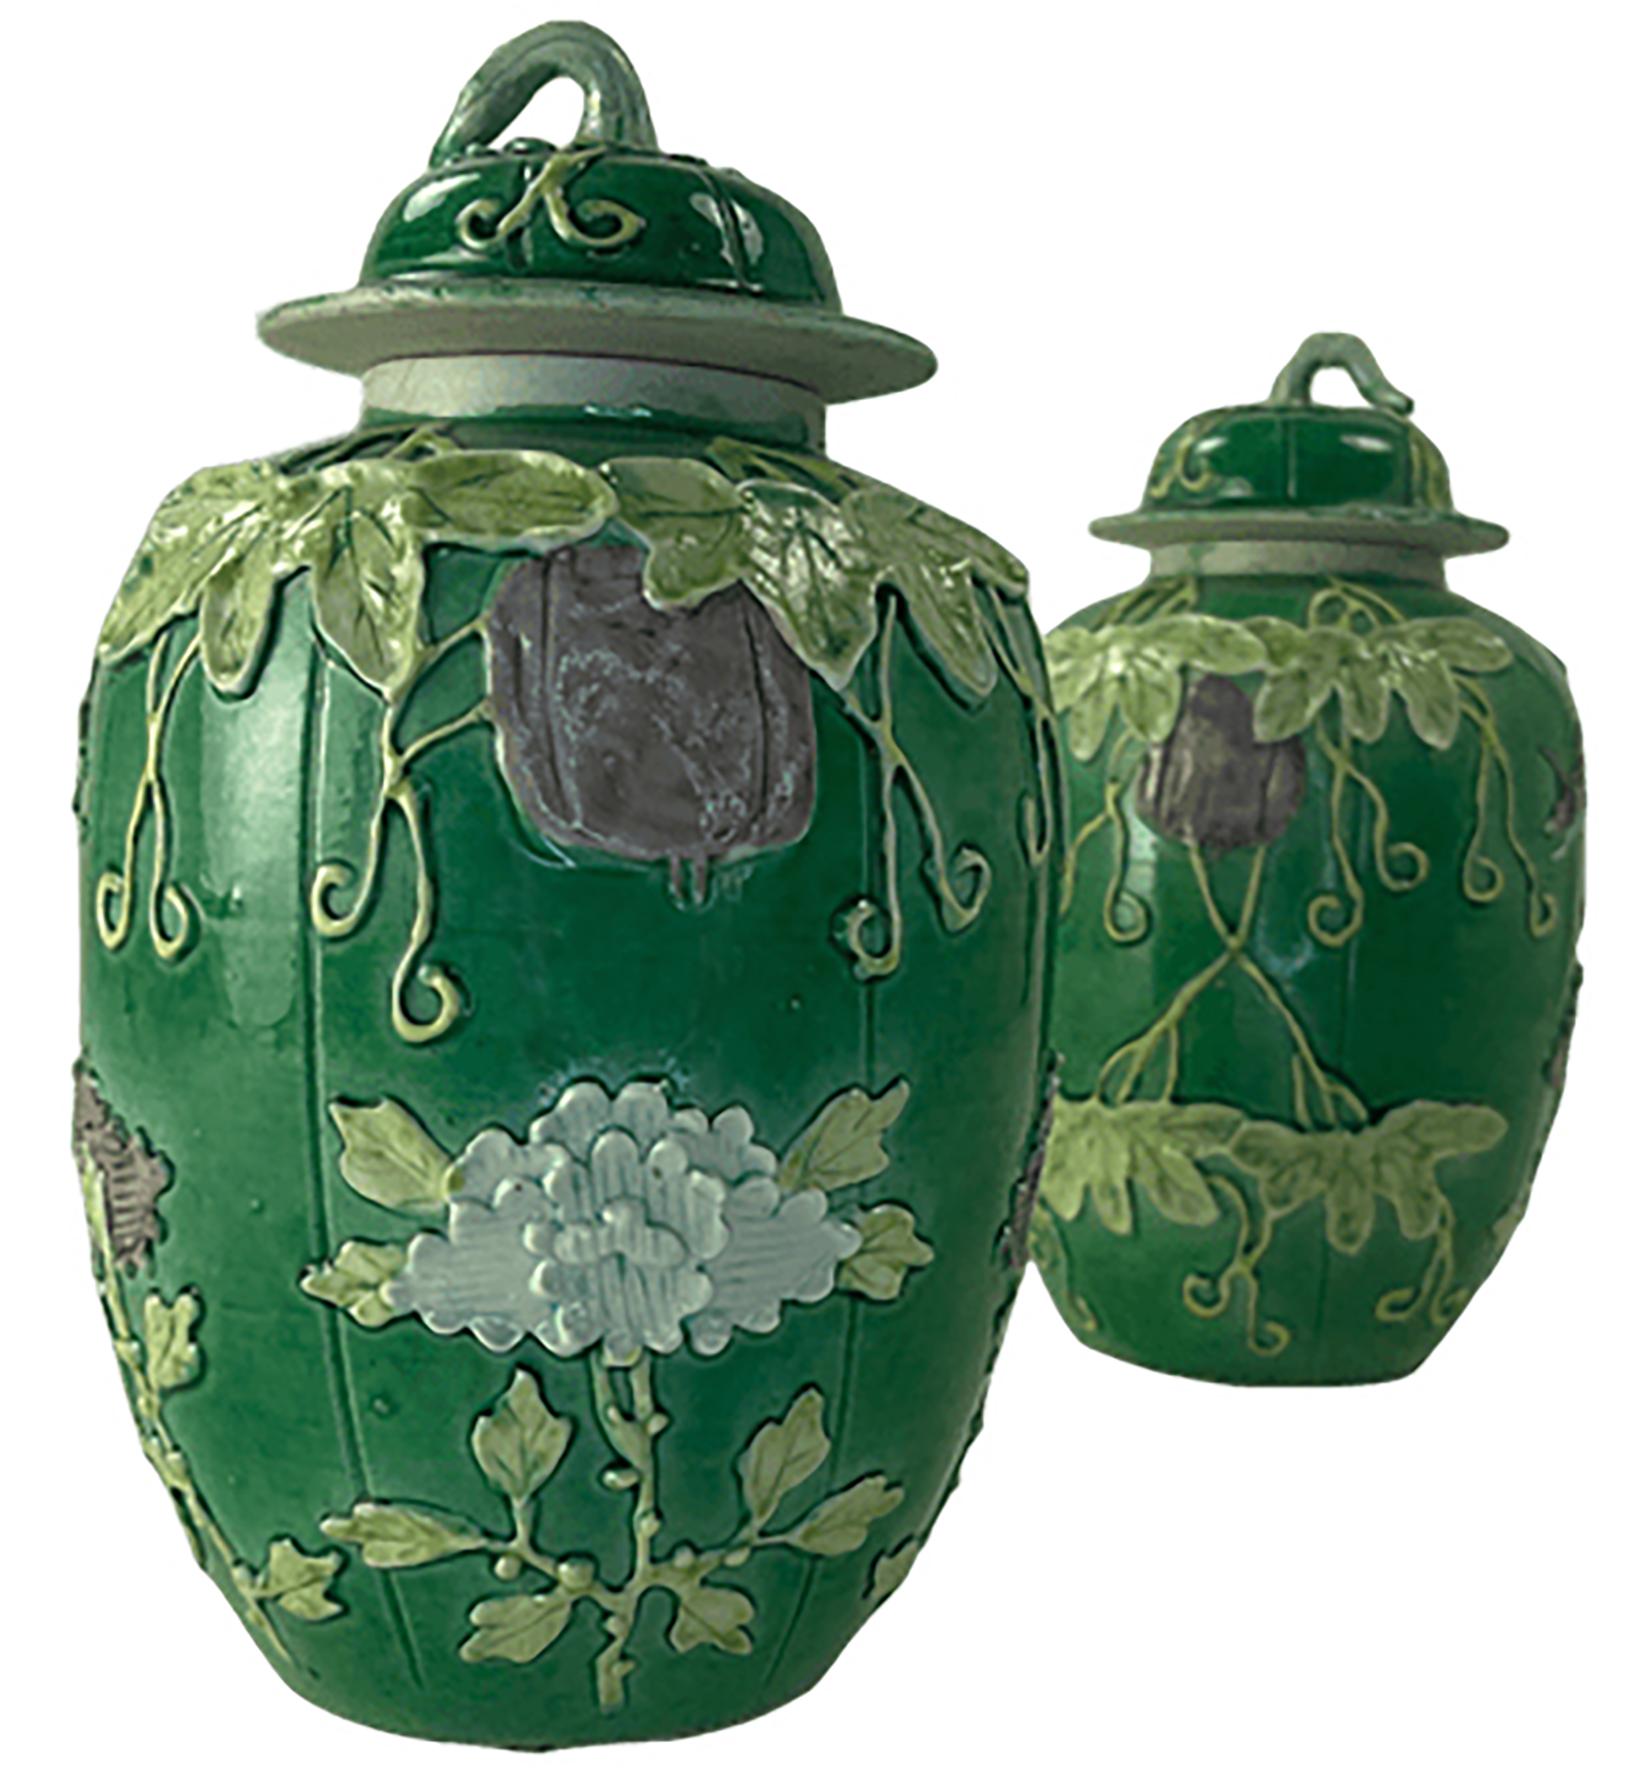 A pair of beautiful green glazed lidded vintage porcelain ginger jars. Unmarked on the bottom. Green vines and foliage are hand sculpted as dimensional features on the side of the jars with some light purple flowers included. Possibly from China,